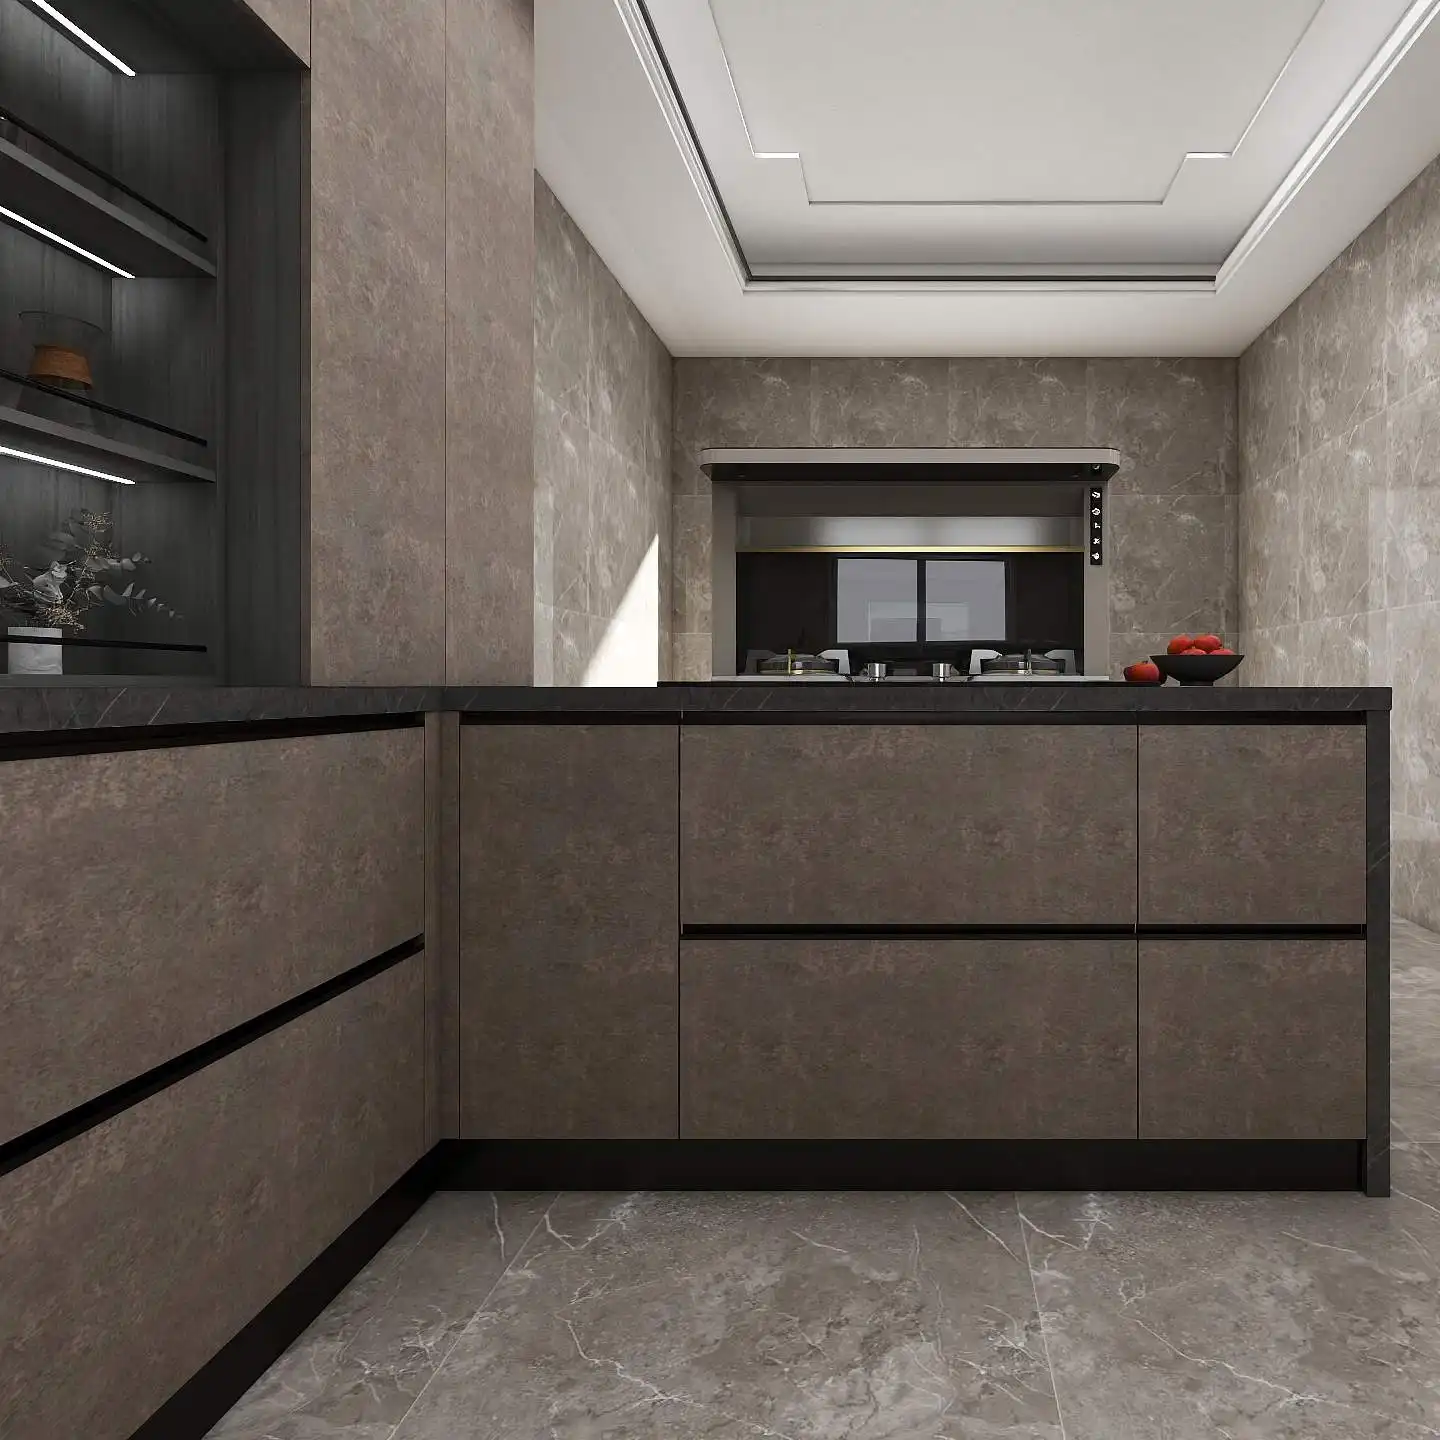 Simple Design Korean Style Kitchen Cabinets Particleboard Wall Cabinet design kitchen